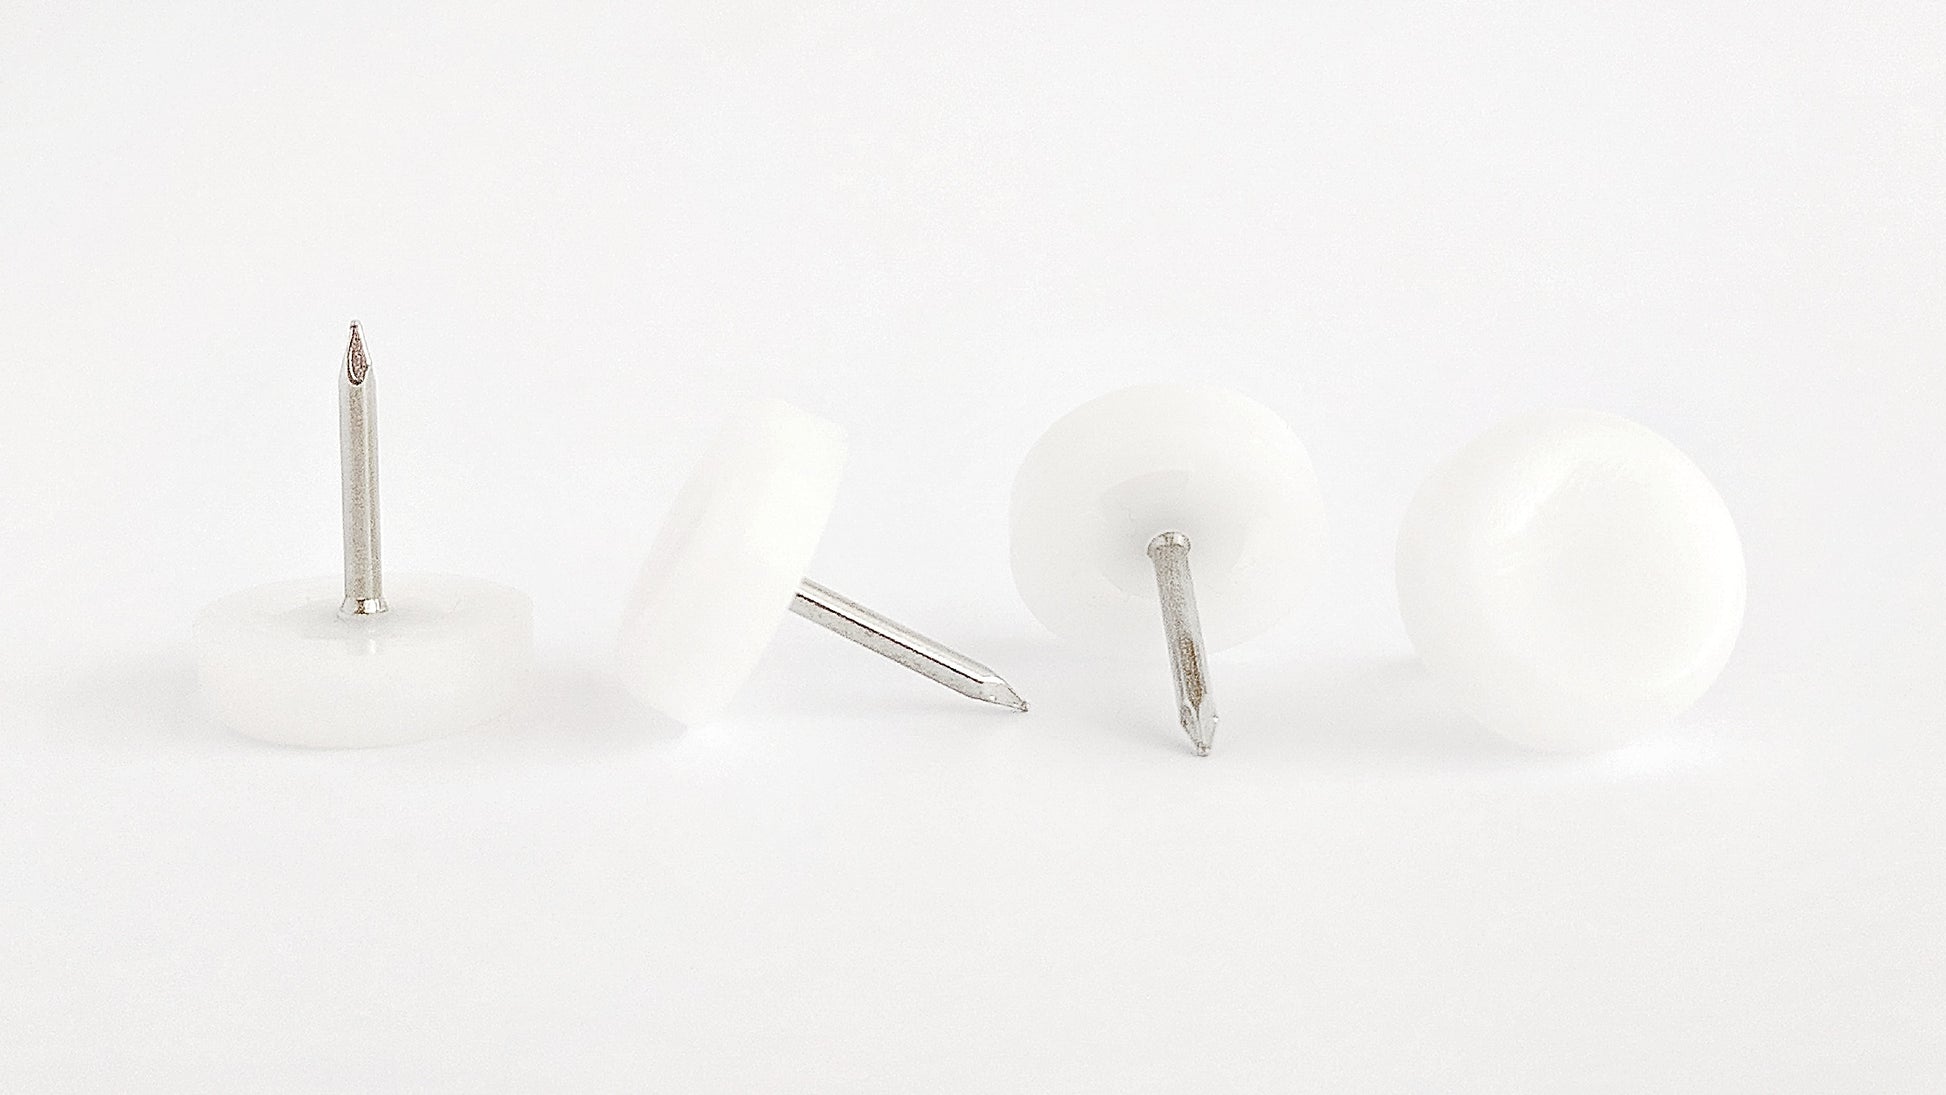 18mm White Plastic Nail On Gliders - Made in Germany - Keay Vital Parts